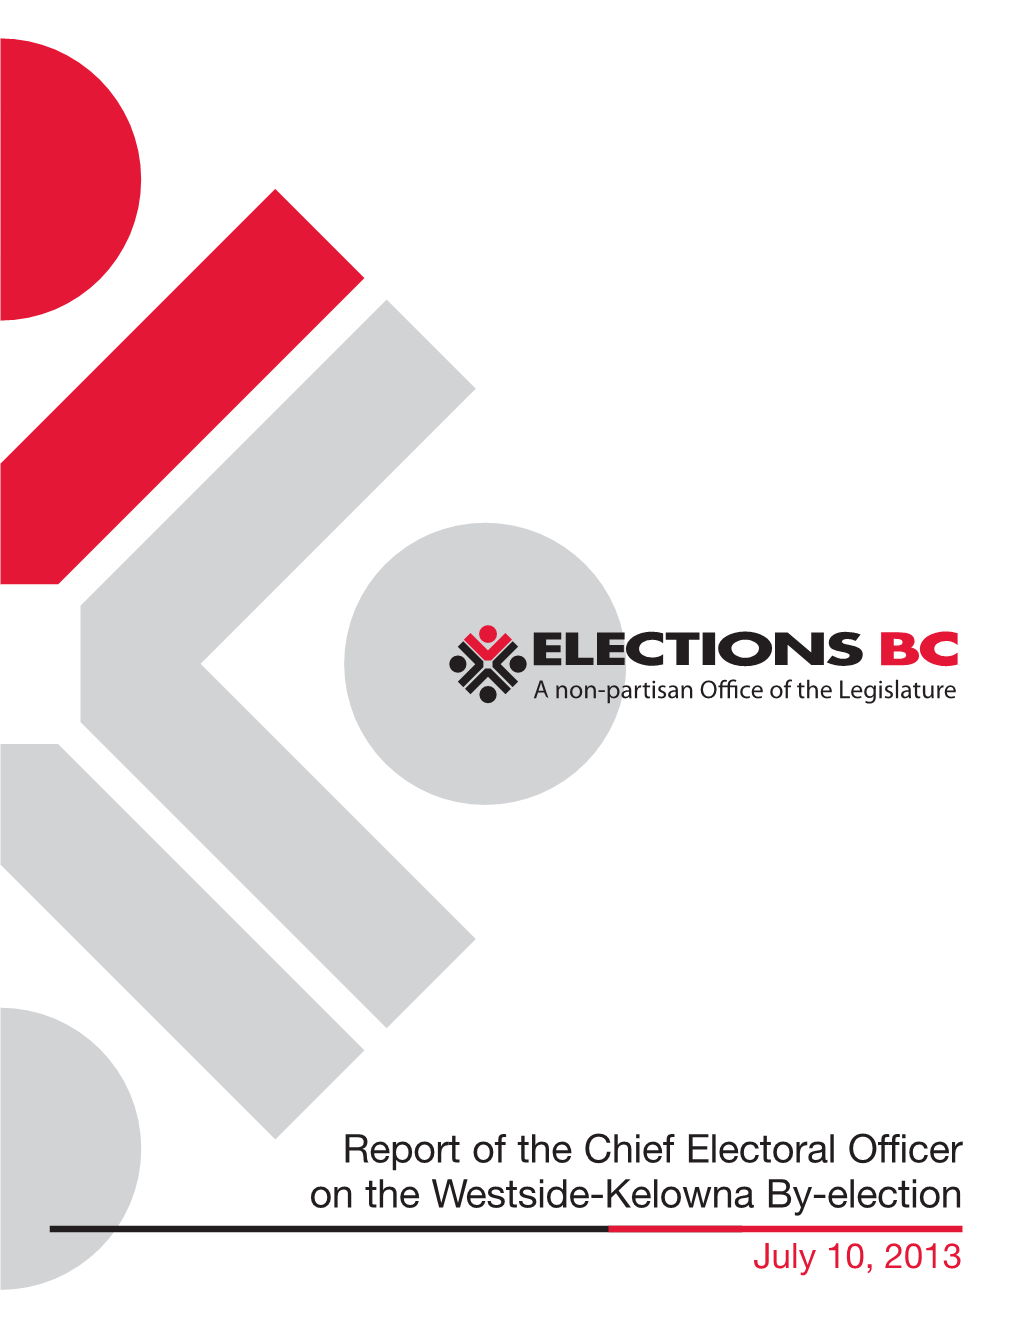 Report of the Chief Electoral Officer on the Westside-Kelowna By-Election